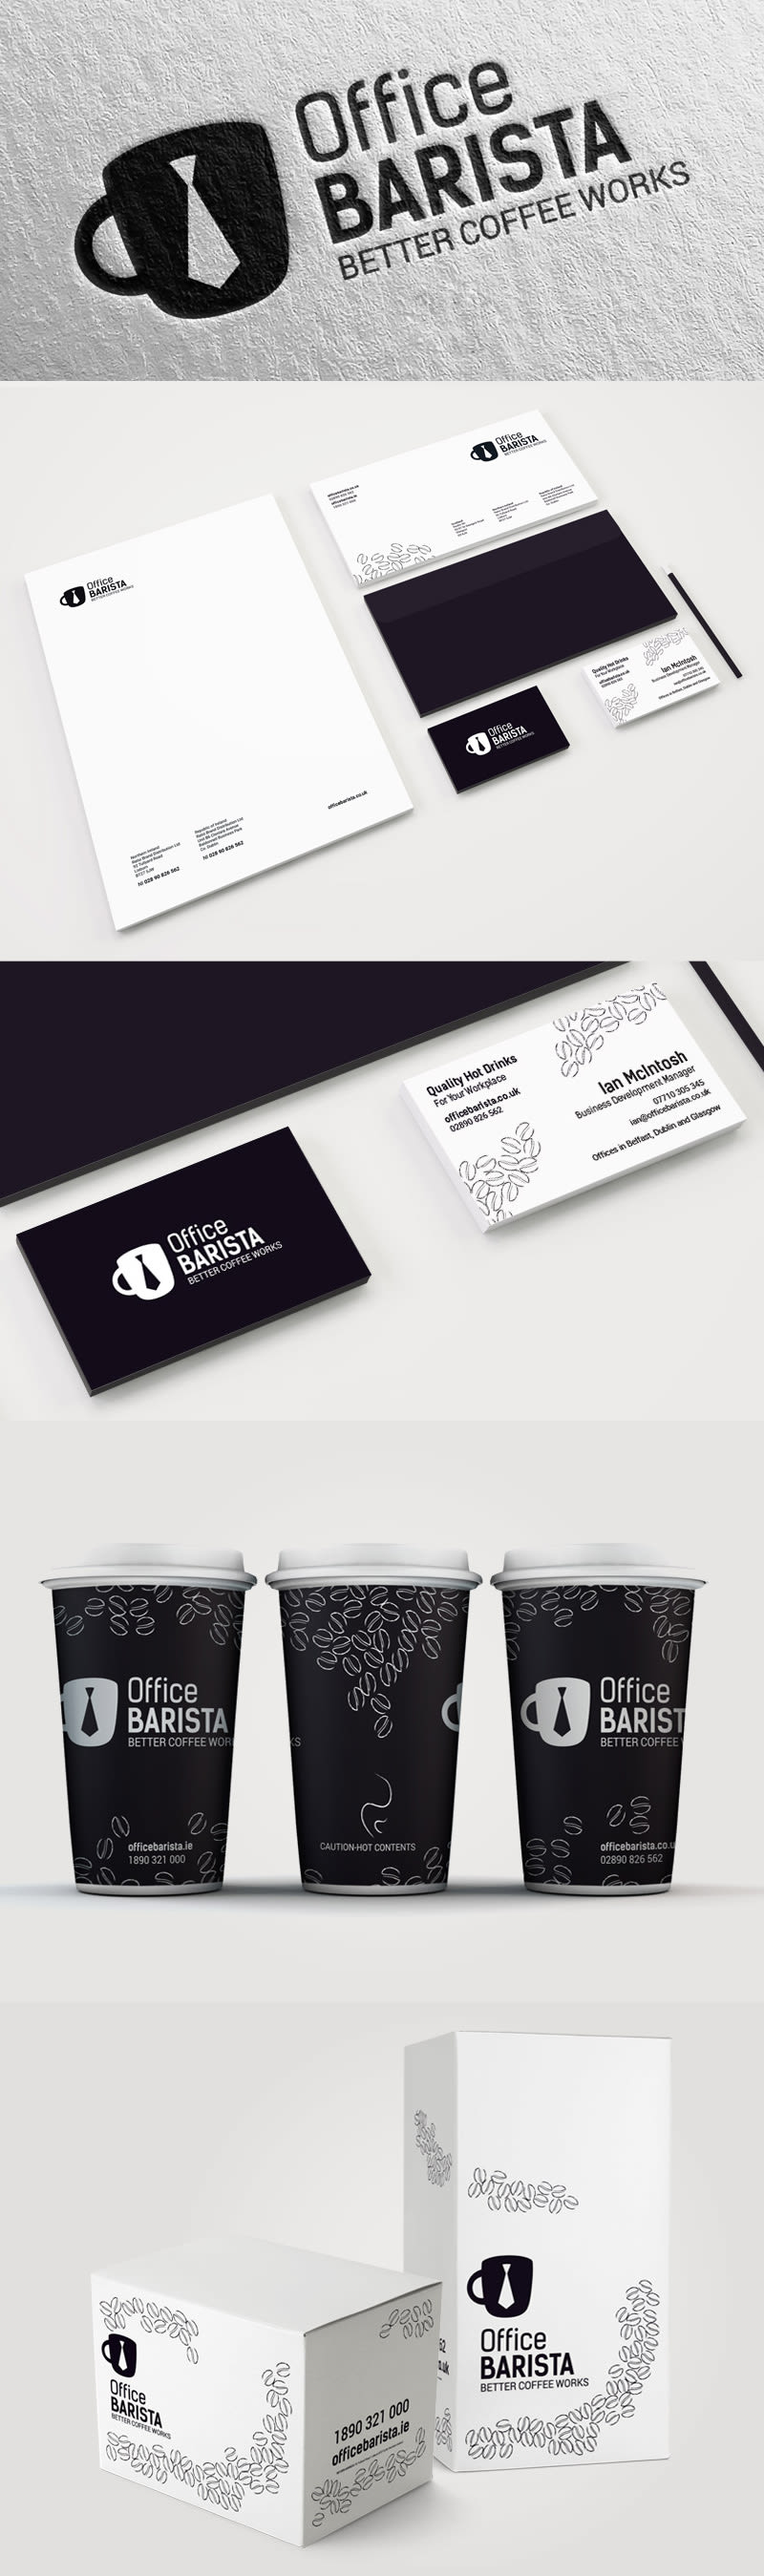 Office Barista. Branding and packaging design 0